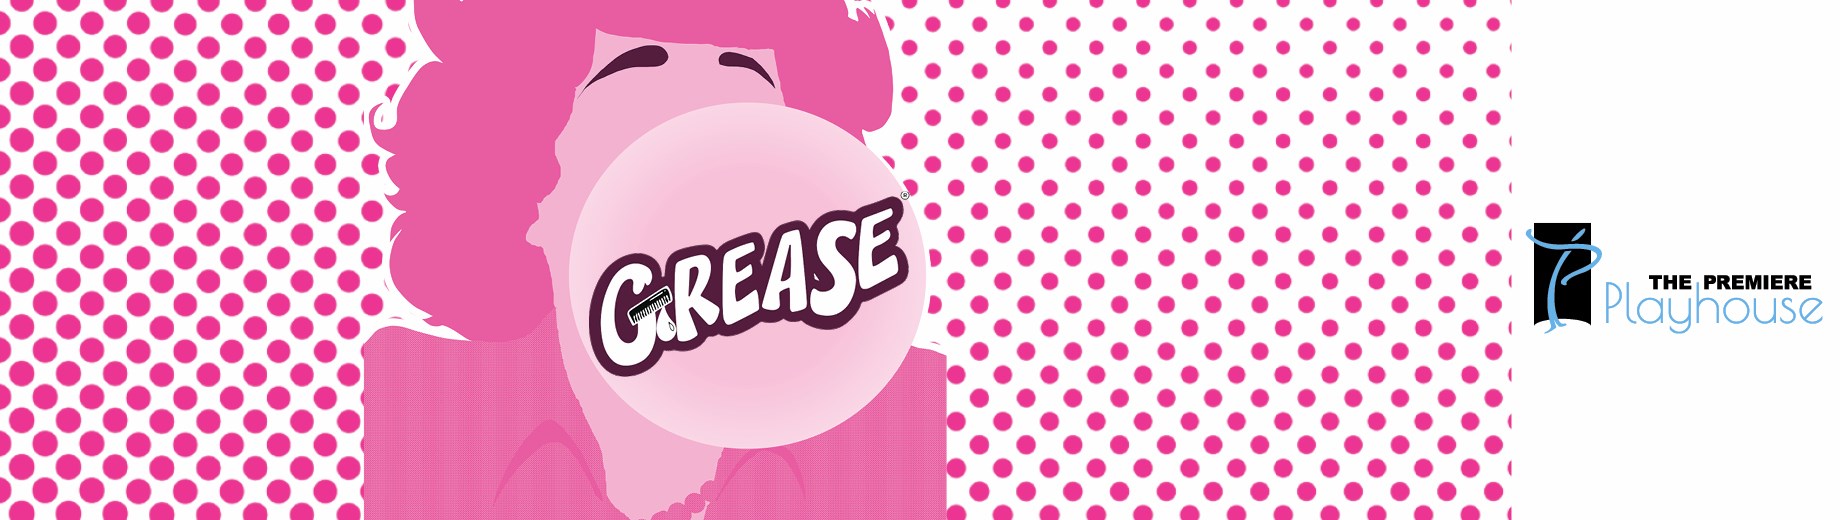 The Premiere Playhouse presents Grease